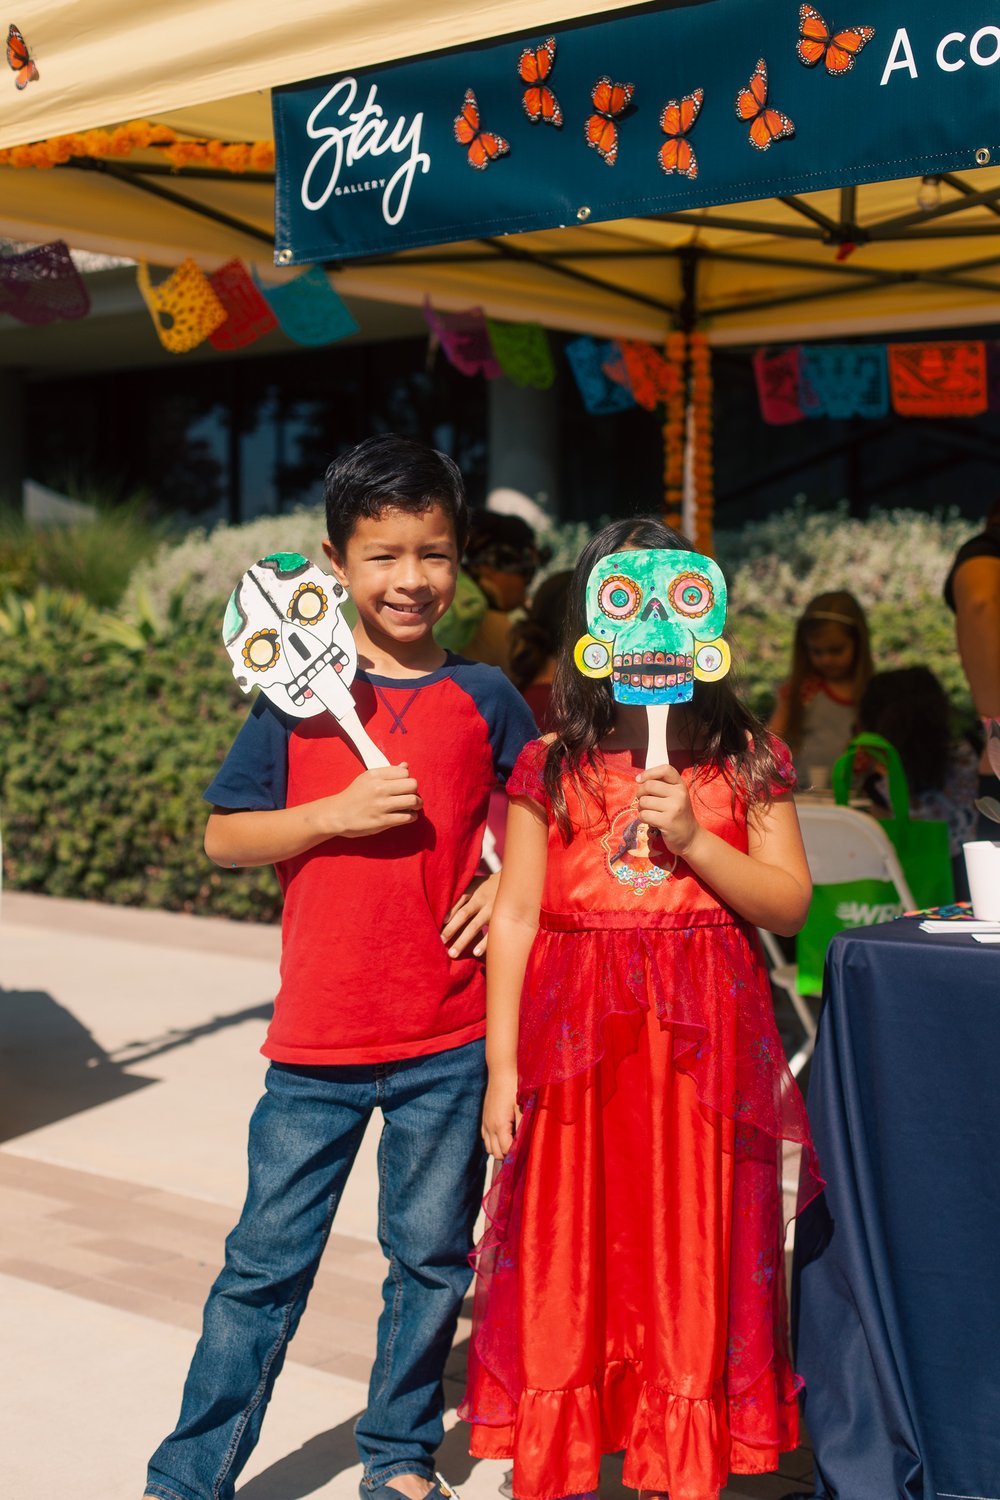  Free watercolor and mask making workshop in collaboration with  Polaris Castillo  for the 9th Annual Downey Día de los Muertos Art Festival, hosted by the Downey Theatre and the City of Downey.  Photo by  Gabriel Enamorado .   October 29, 2022.  